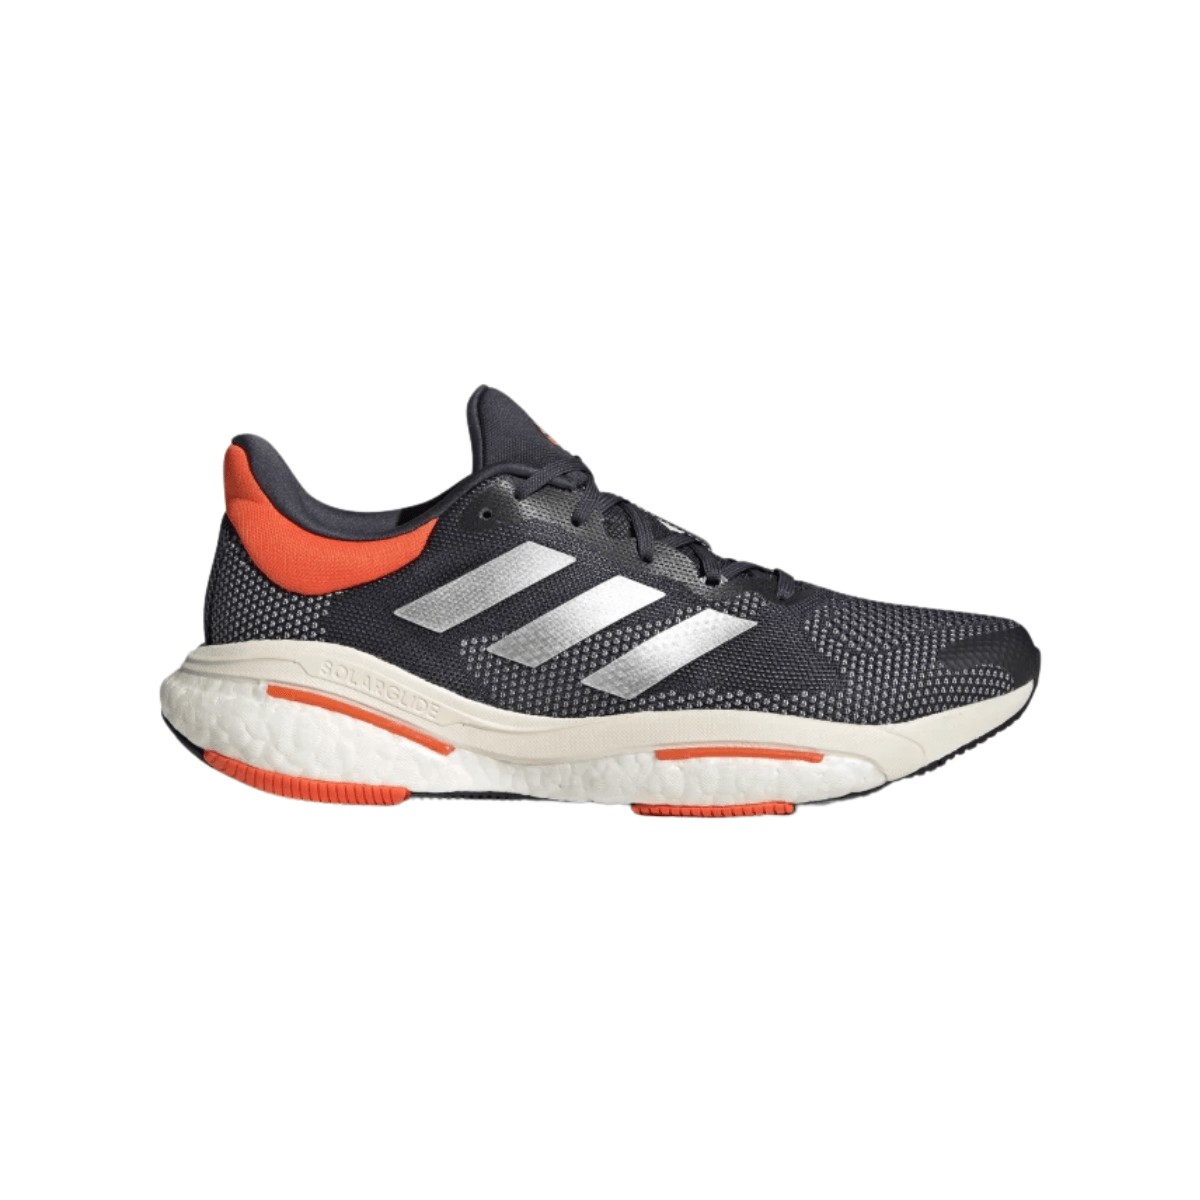 Chaussures Adidas Solar Glide 5M Gris Orange AW22, Taille UK 8